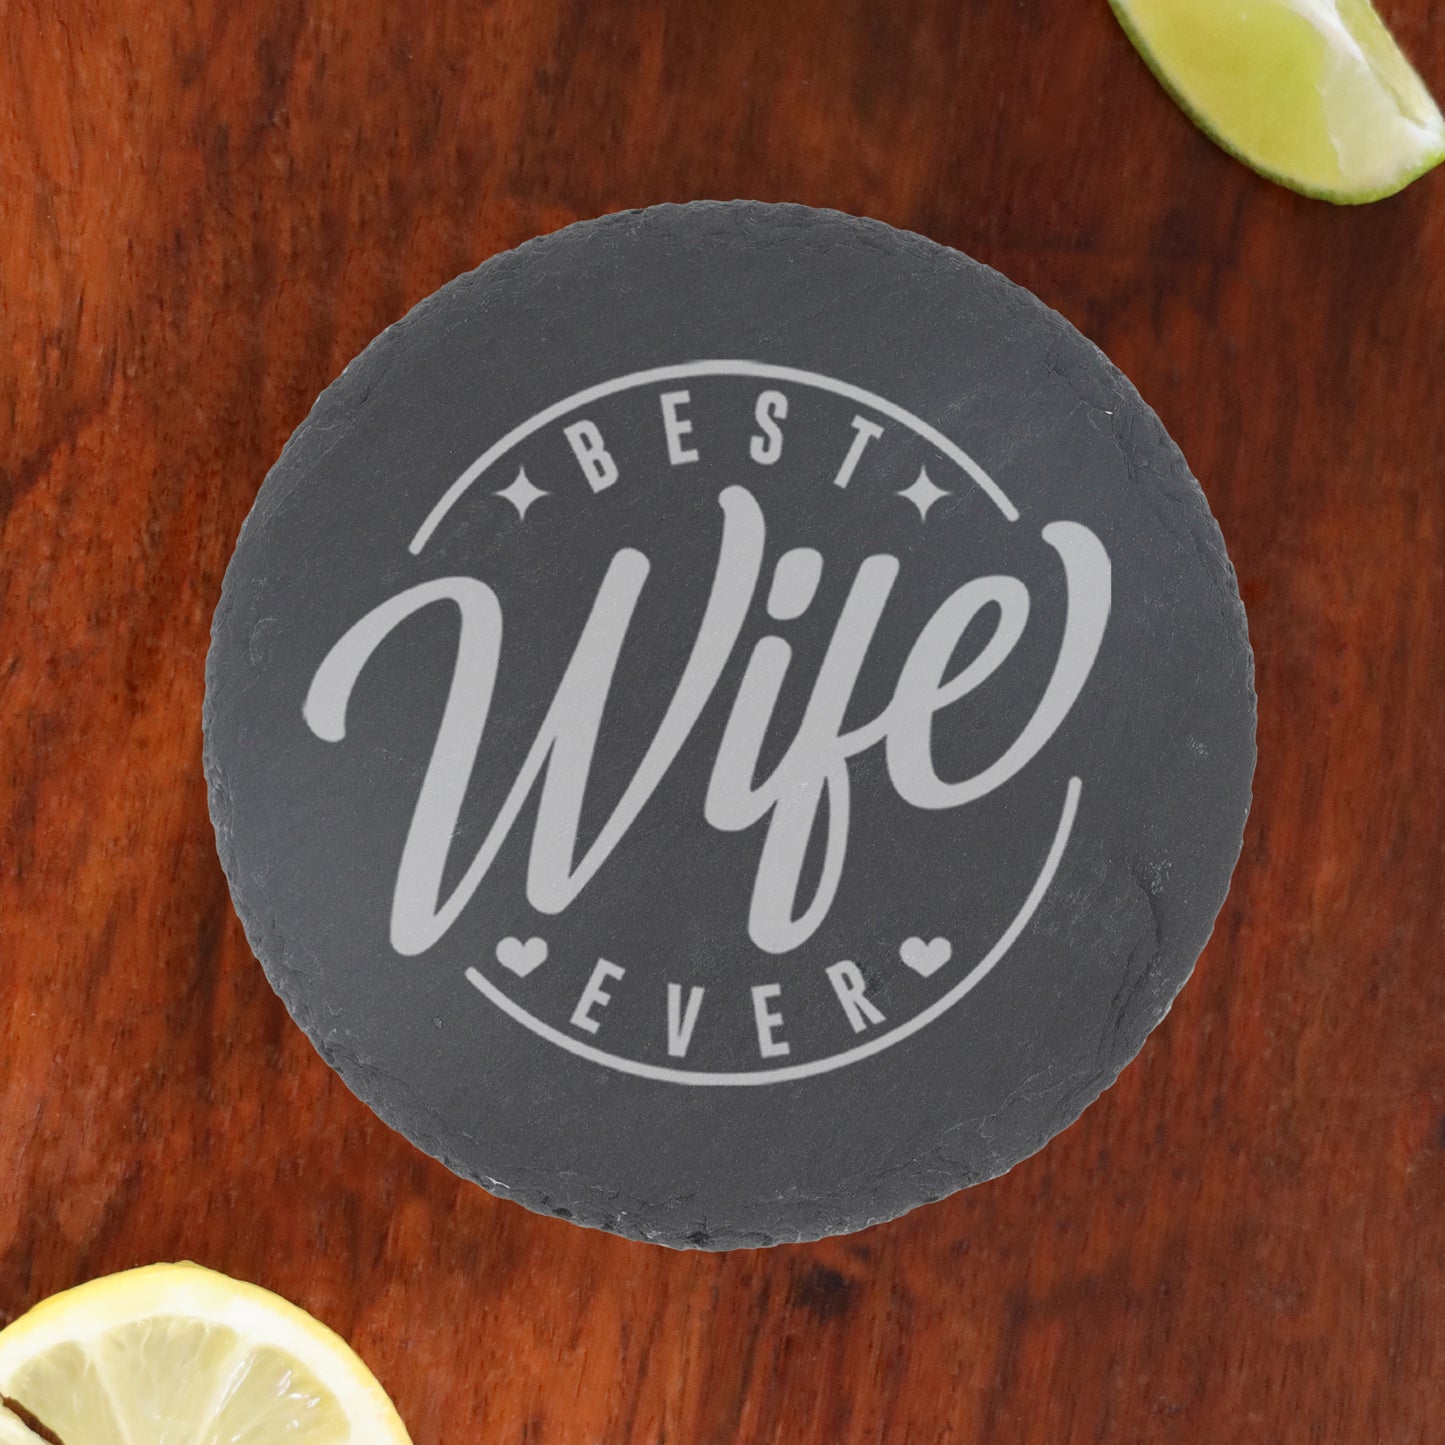 Best Wife Ever Engraved Wine Glass and/or Coaster Gift  - Always Looking Good - Round Coaster Only  